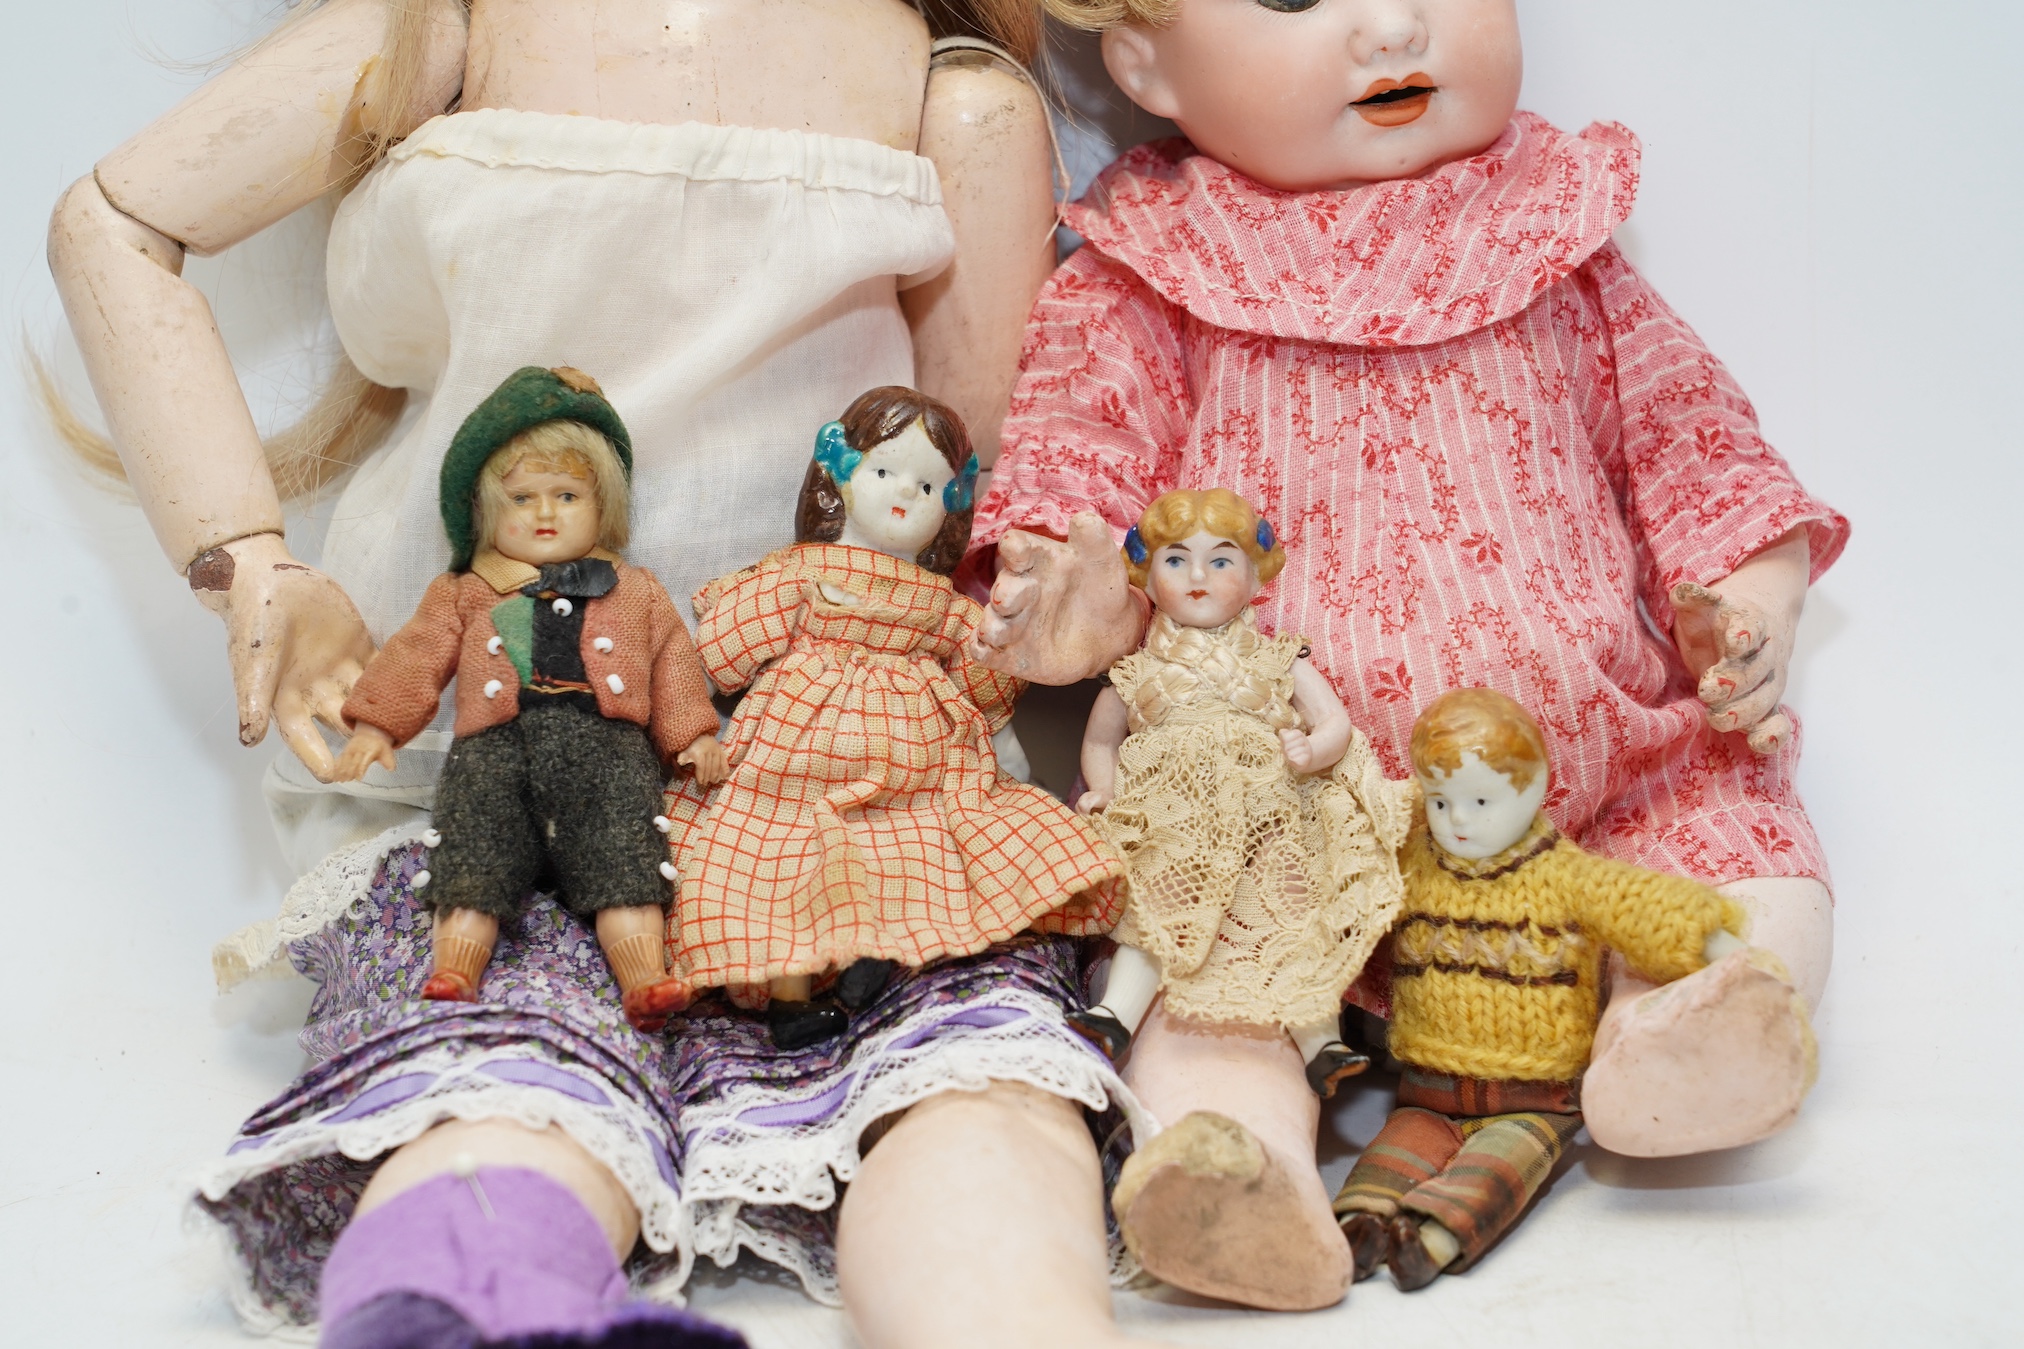 An AM bisque headed doll, an SFBJ 60 bisque doll and four miniature dolls. Condition - poor to fair